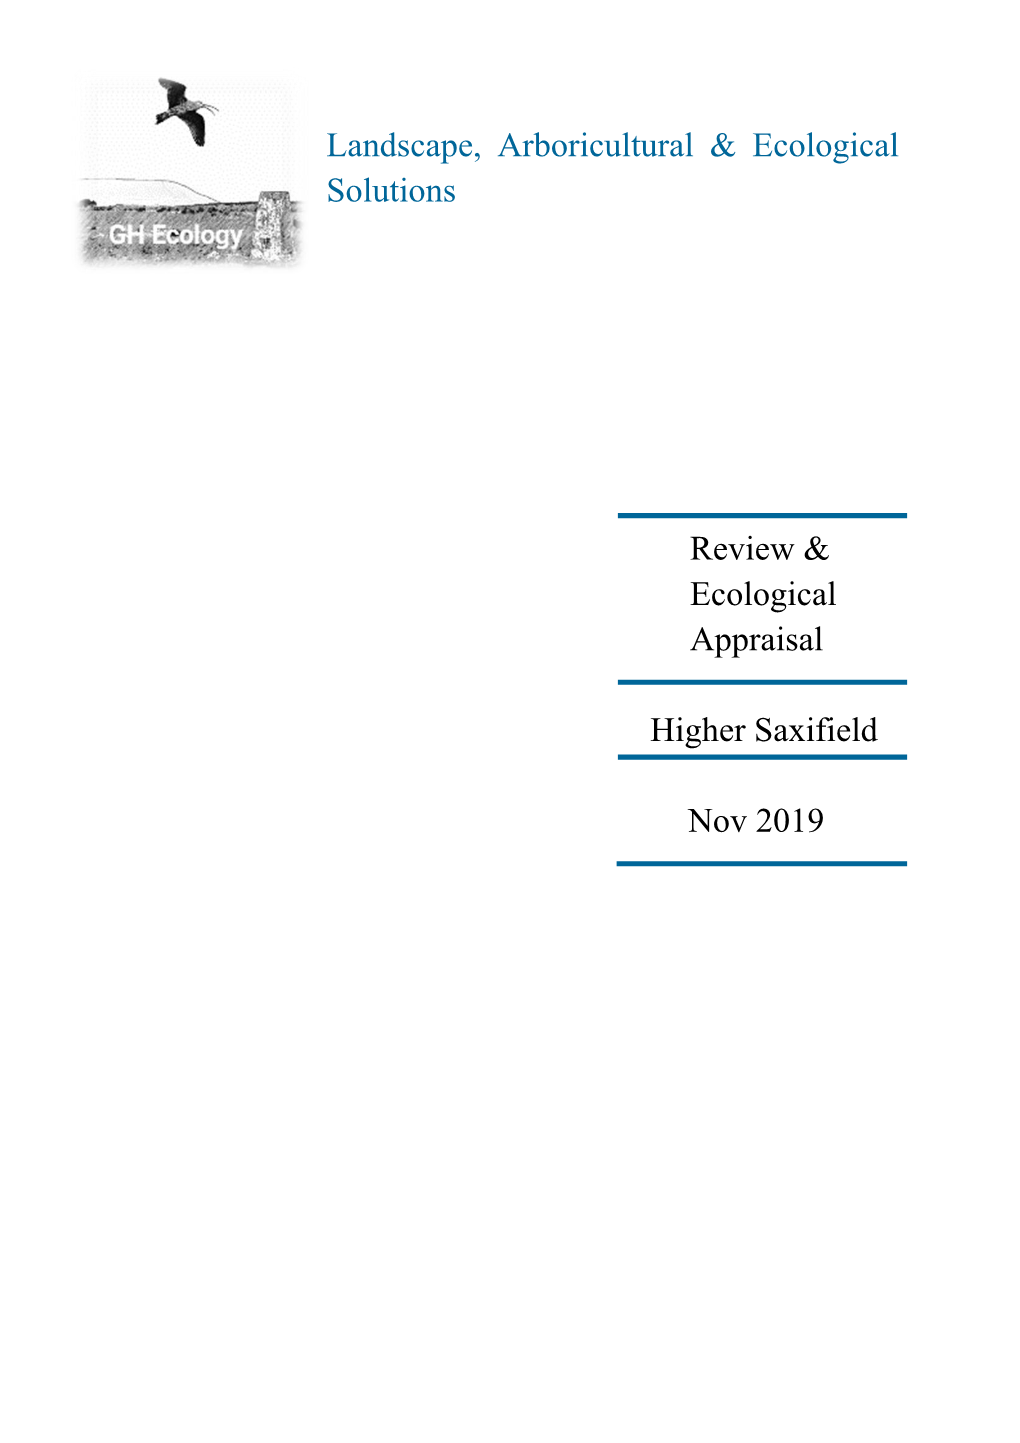 Review & Ecological Appraisal Higher Saxifield Nov 2019